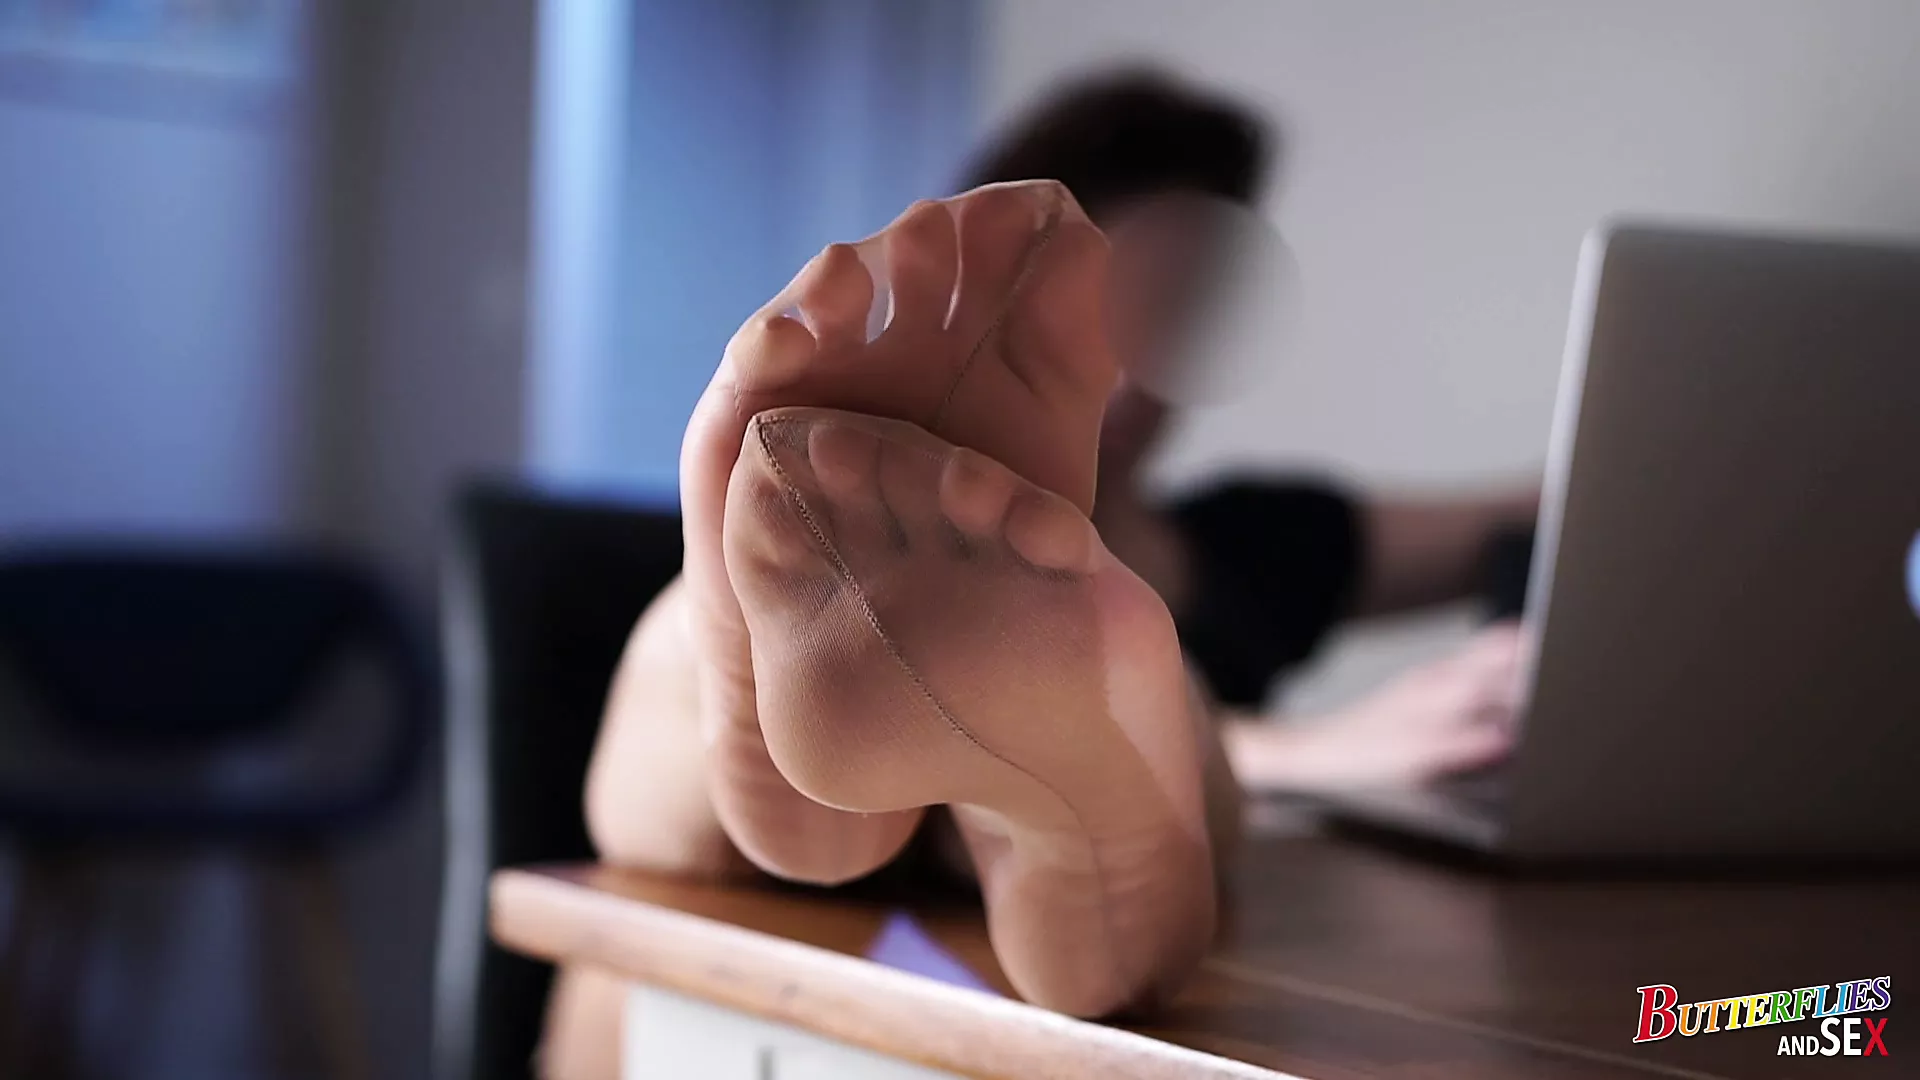 Looking At My Nylon Foot - Feet Fetish - I Give You My Nylon Feet to Smell and Lick | xHamster